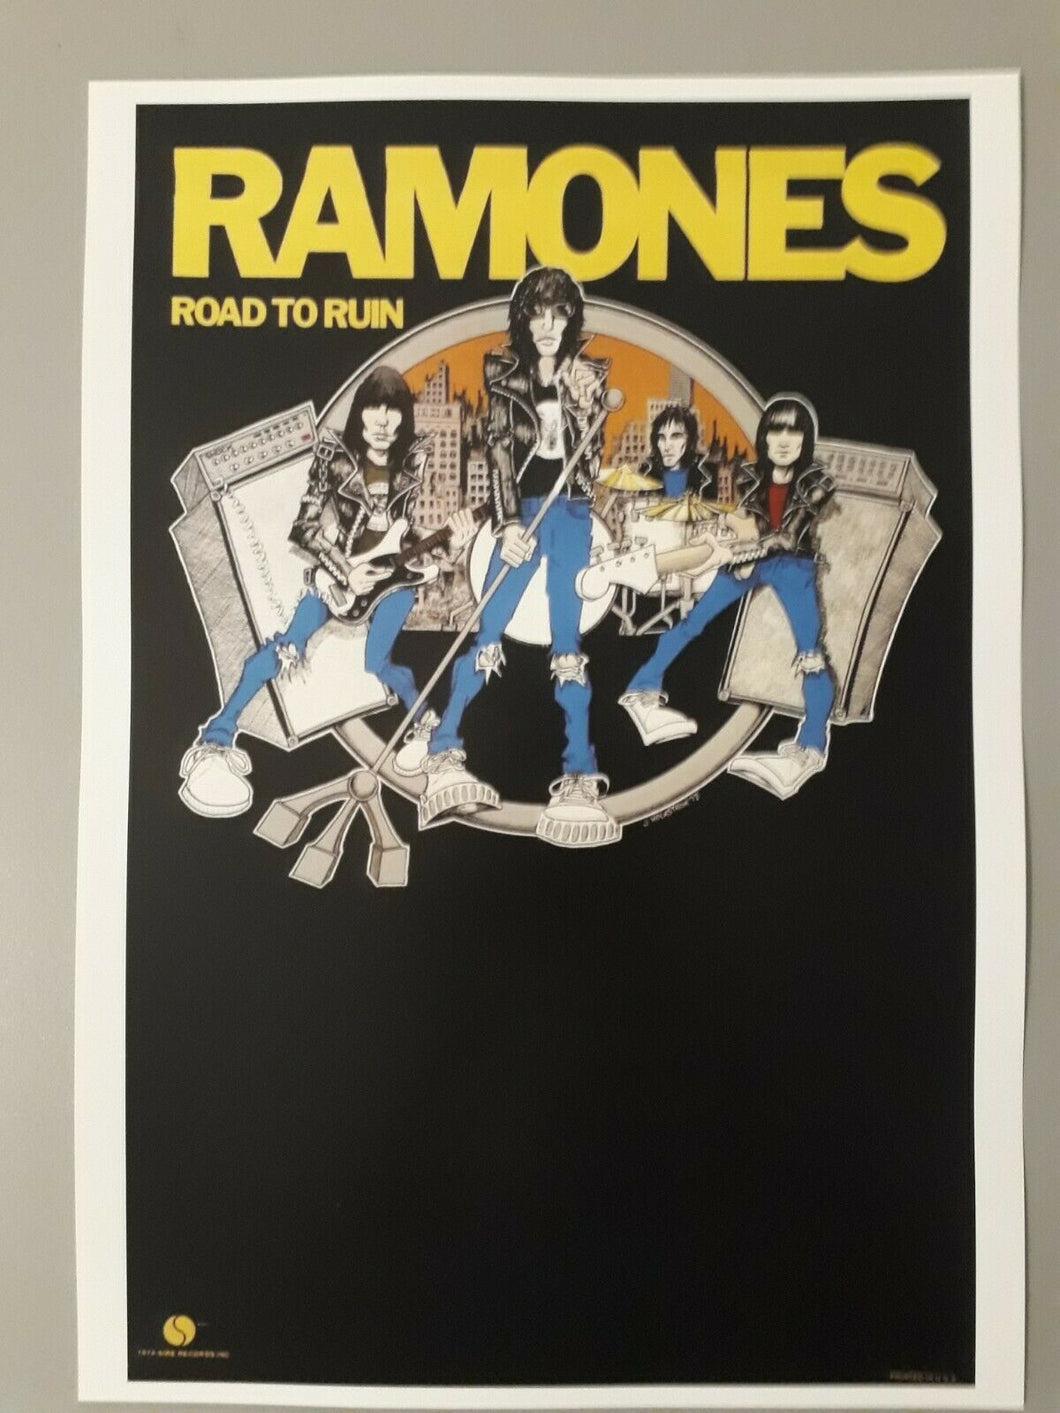 Ramones poster - Road to Ruin 1978 promotional A3 size reprint - Original Music and Movie Posters for sale from Bamalama - Online Poster Store UK London